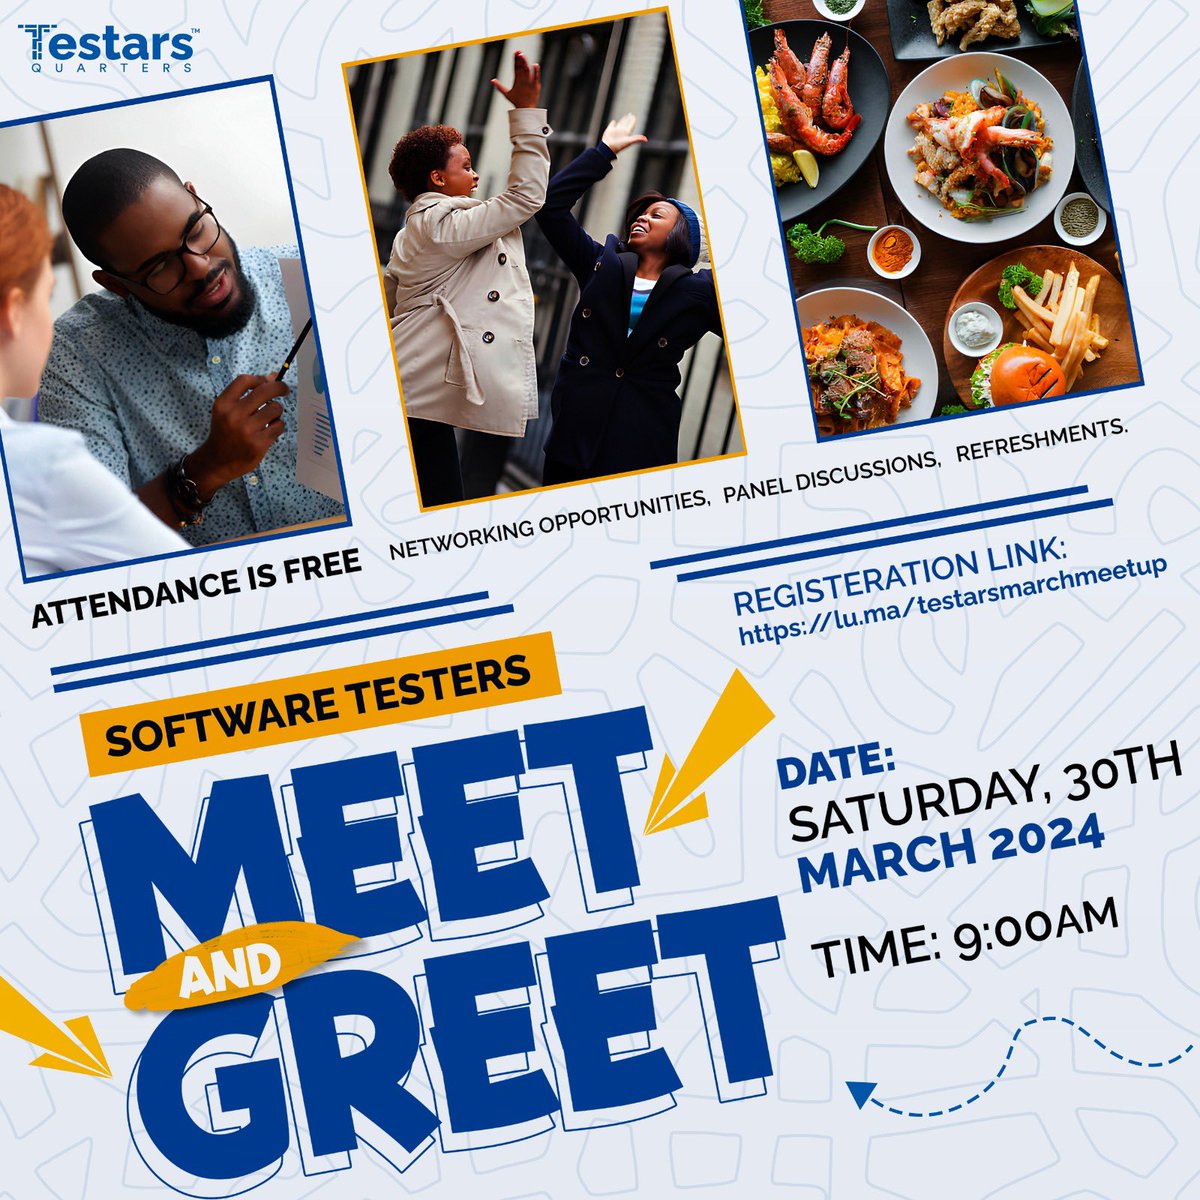 Testers in Lagos and its environment, let's meet and greet on March 30, 2024, at 9 am with 300+ testers!!!! Register Now: lu.ma/testarsmarchme…